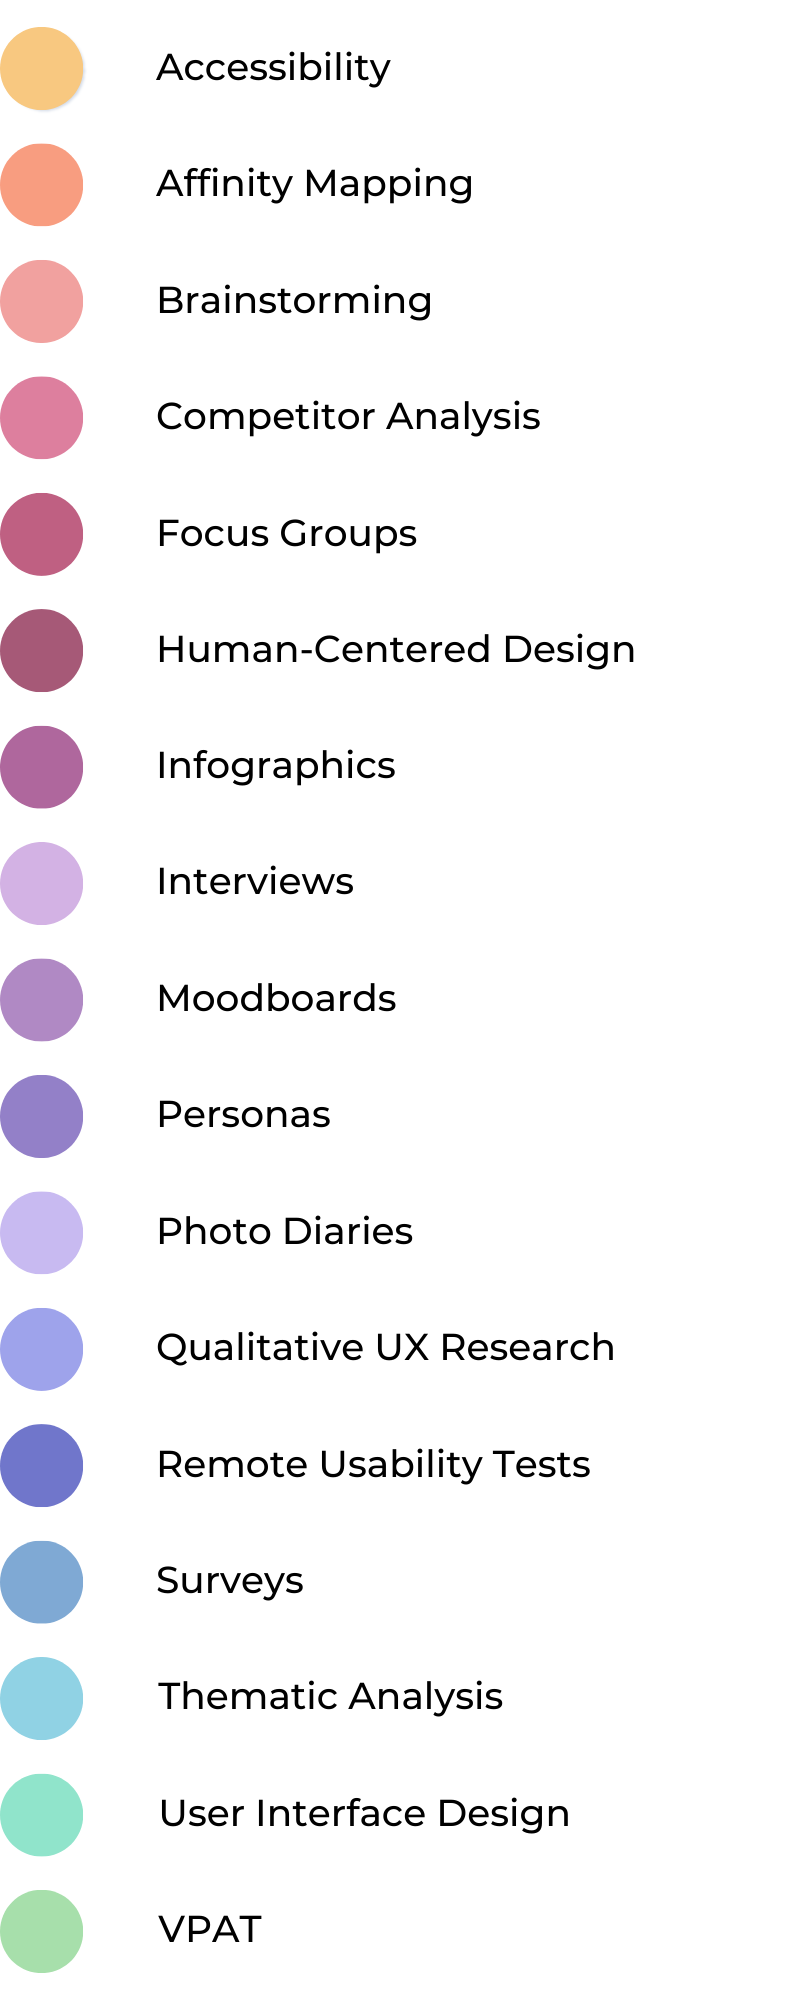 List of Jenni's methods: Accessibility, Affinity Mapping, Brainstorming, Competitor Analysis, Focus Groups, Human-Centered Design, Infographics, Interviews, Moodboards, Personas, Photo Diaries, Qualitative UX Research, Remote Usability Tests, Surveys, Thematic Analysis, User Interface Design, VPAT